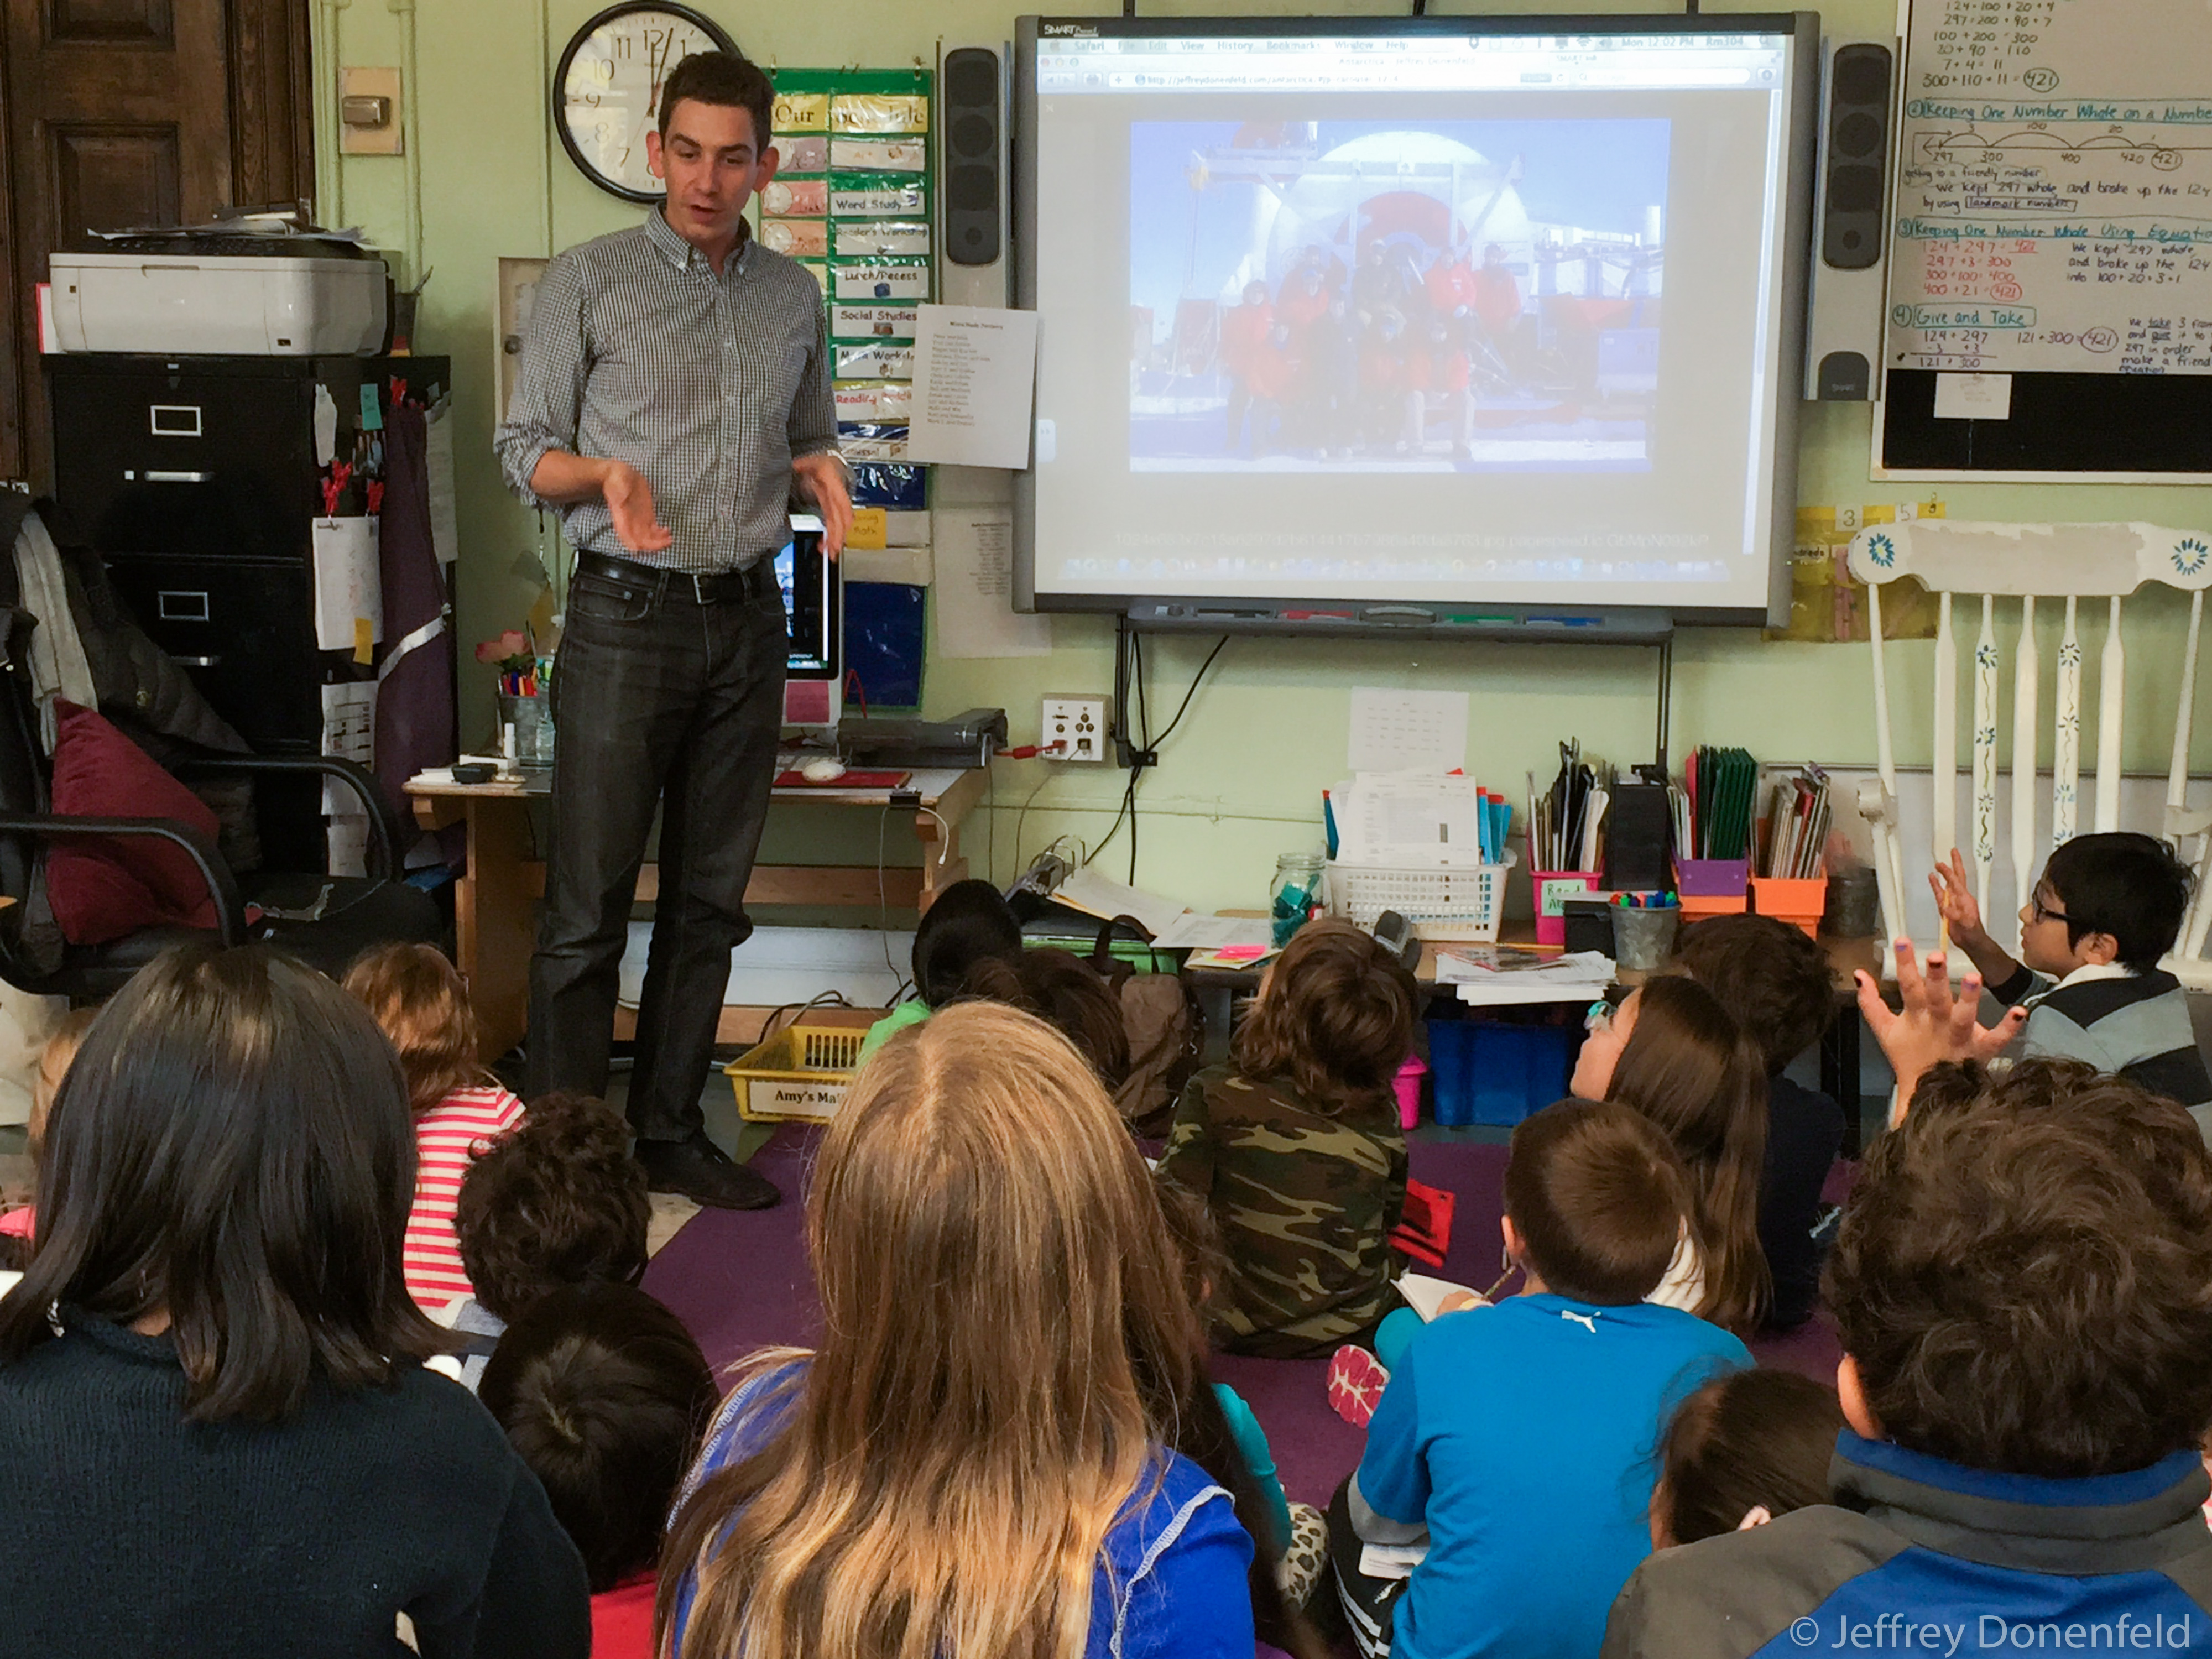 Discussing Antarctica with Third-Graders